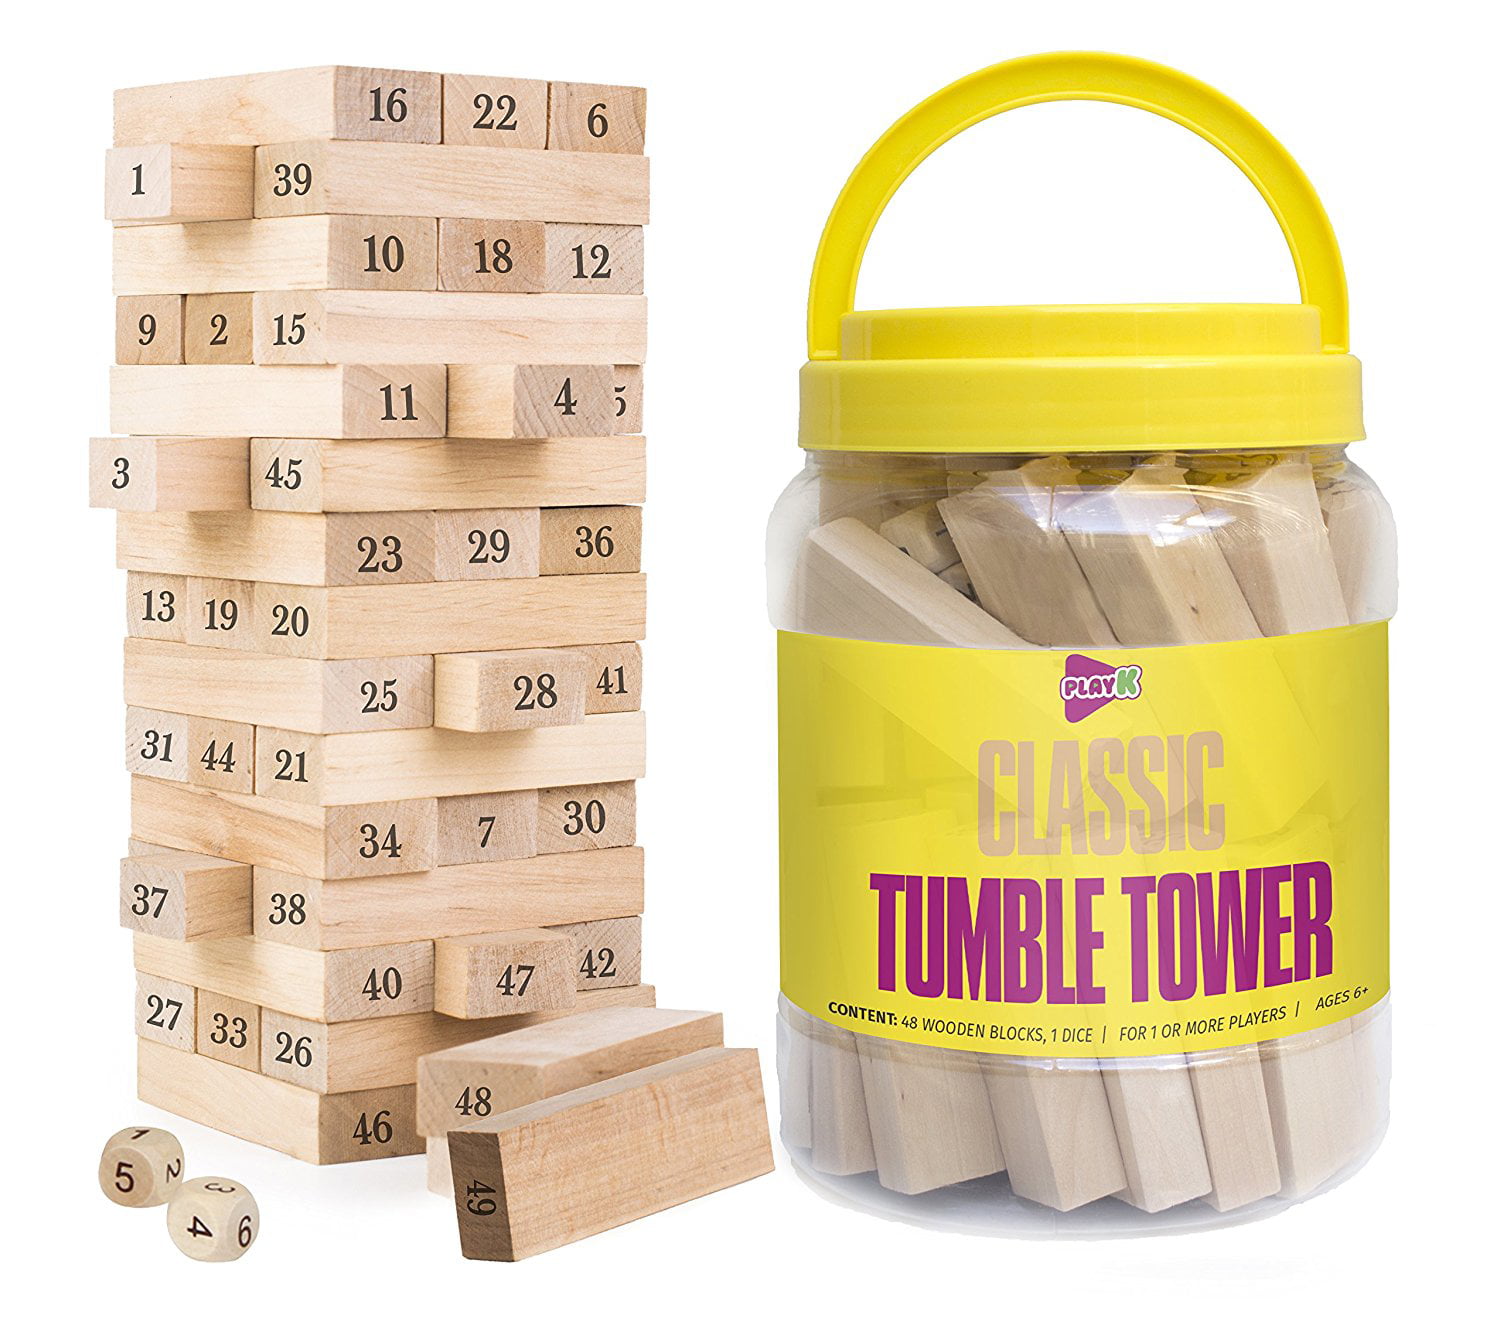 Jenga Wooden Blocks Classic Tumble Tower Generic Family Drinking Party Game Great Ent...